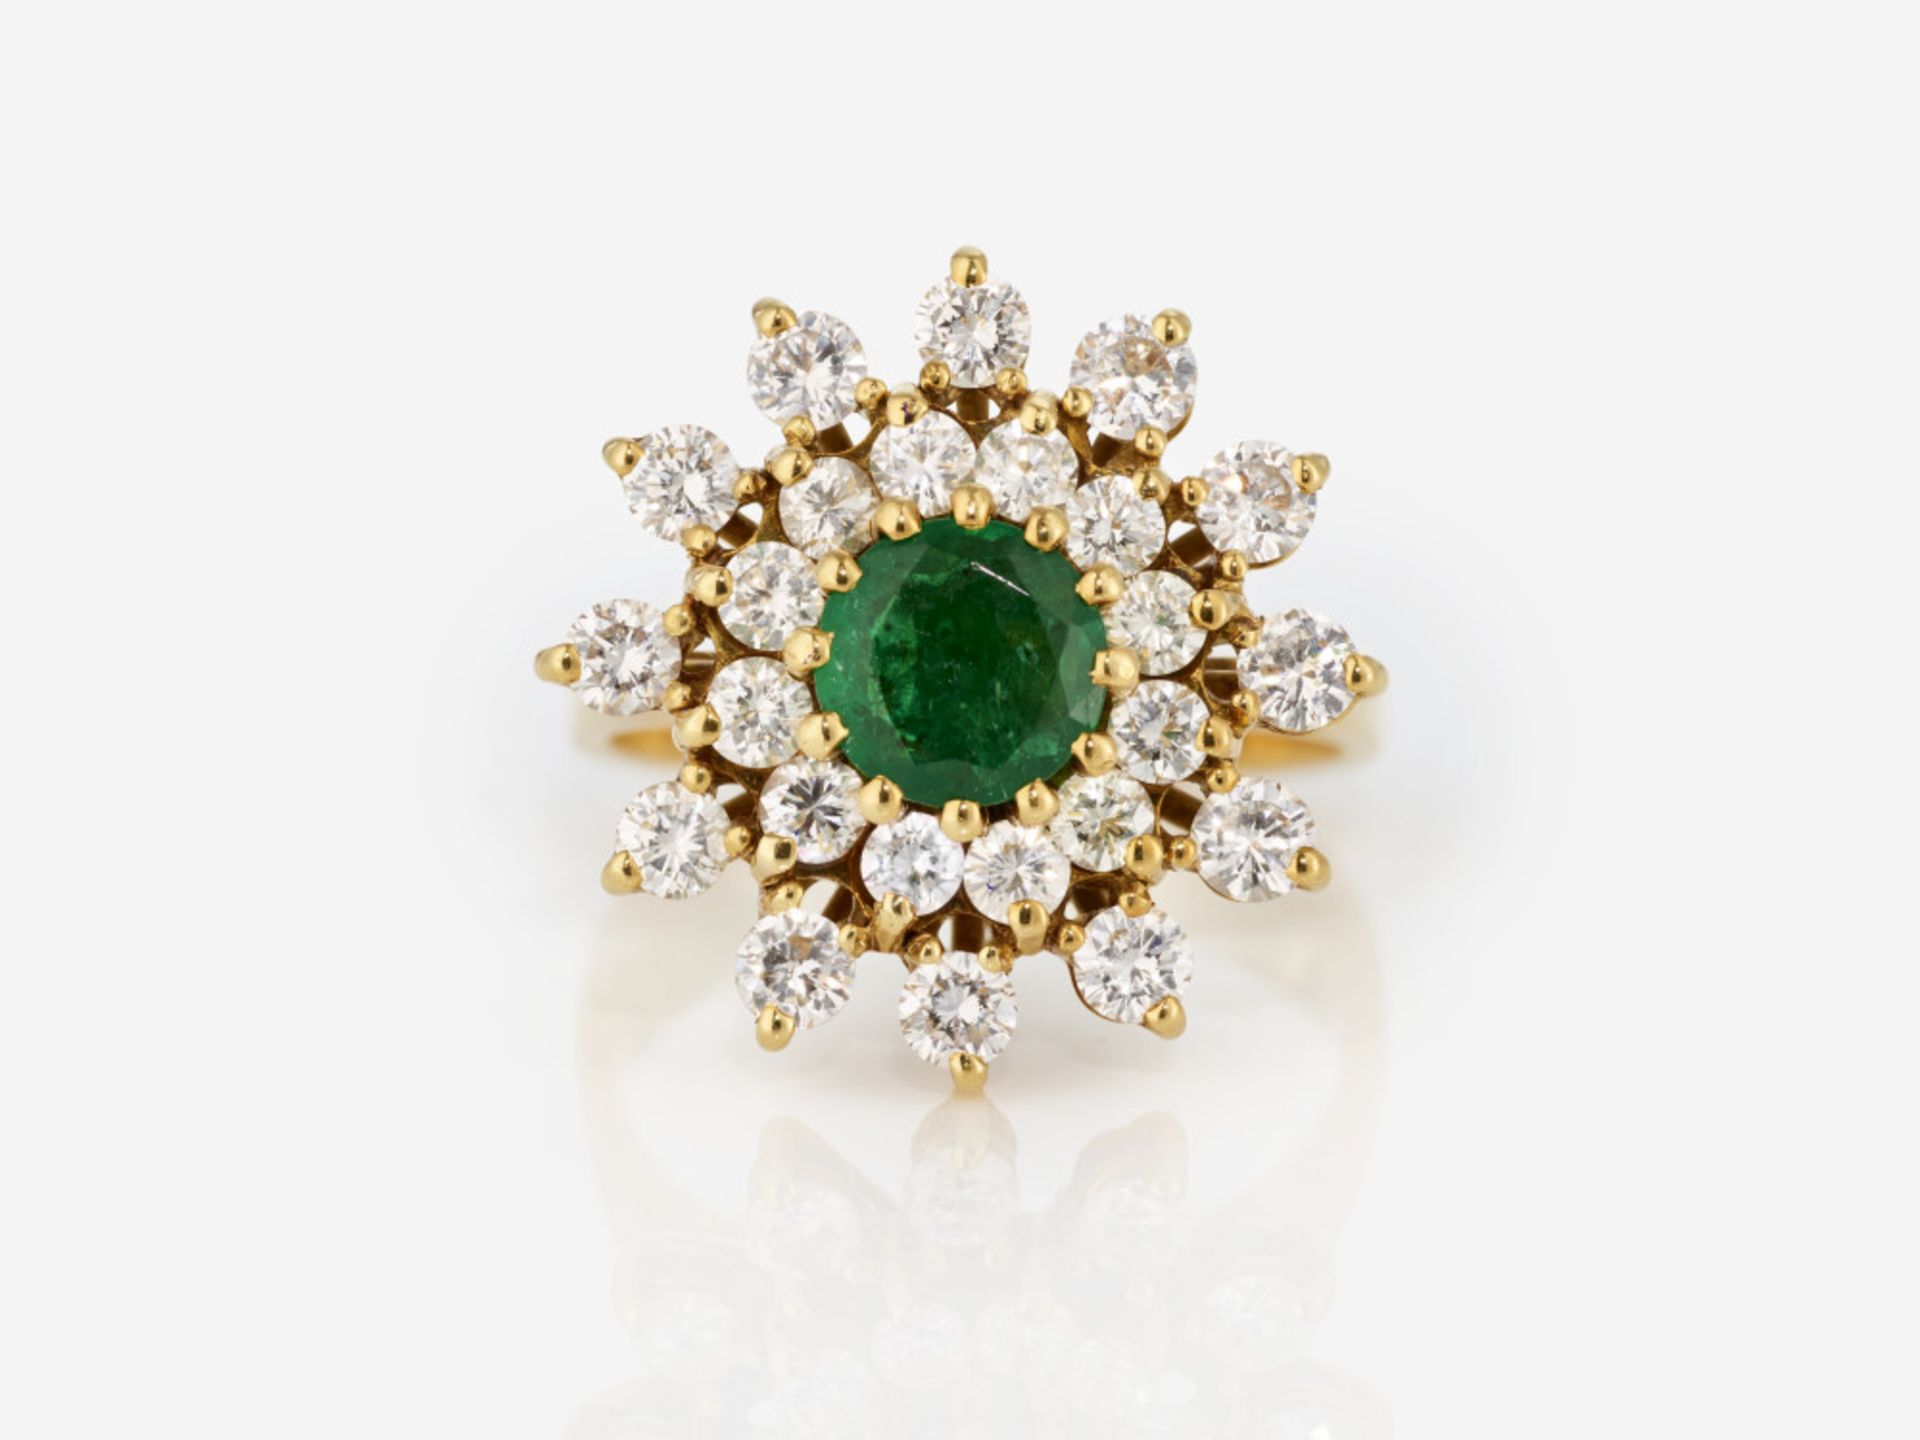 A double entourage ring with emerald and brilliant-cut diamonds - Germany, 1970s - Image 2 of 2